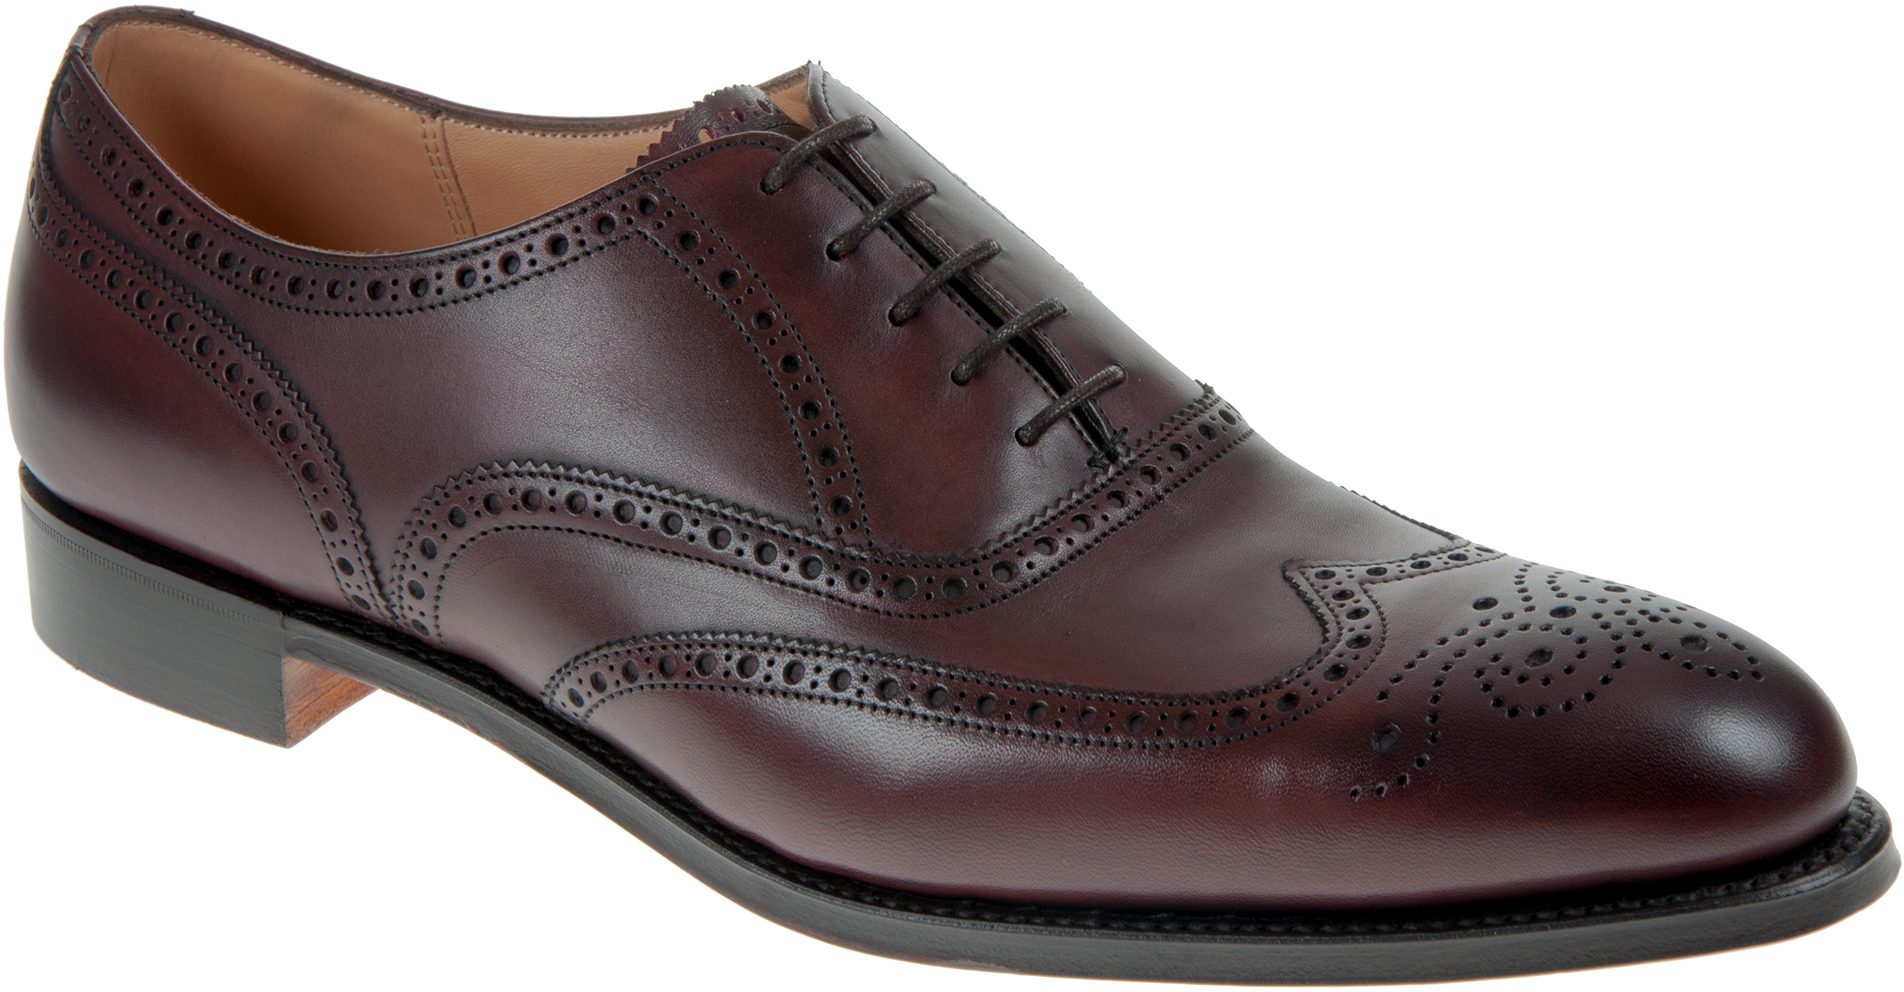 Cheaney Broad II Burgundy Calf 0202/71 - Formal Shoes - Humphries Shoes